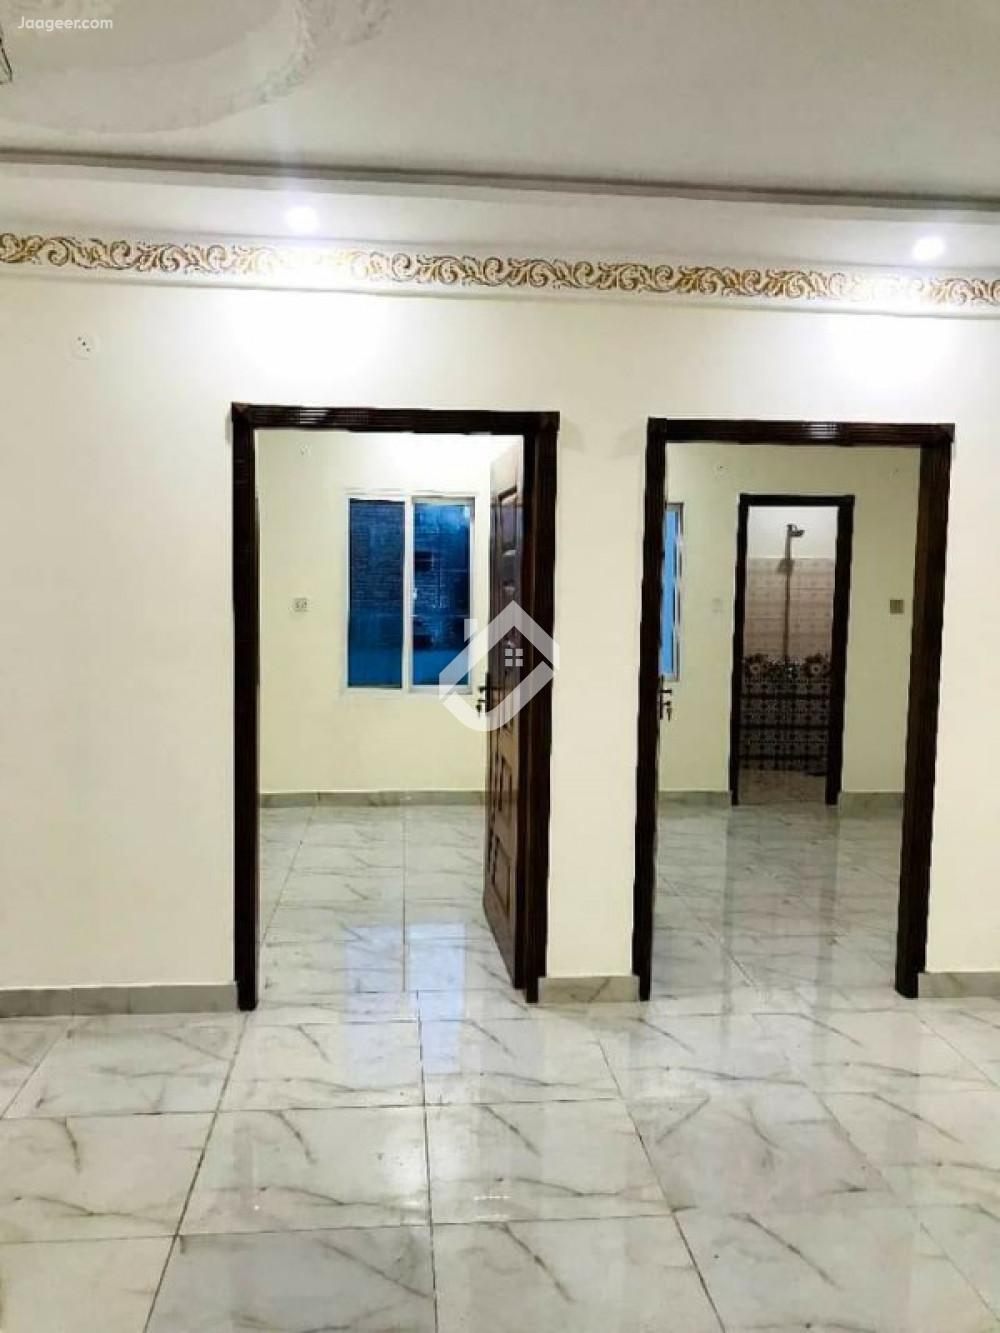 Main image 5 Marla Double Storey Furnished House For Sale In Shaheen Villas Phase-2 Shaheen Villas, Sheikhupura